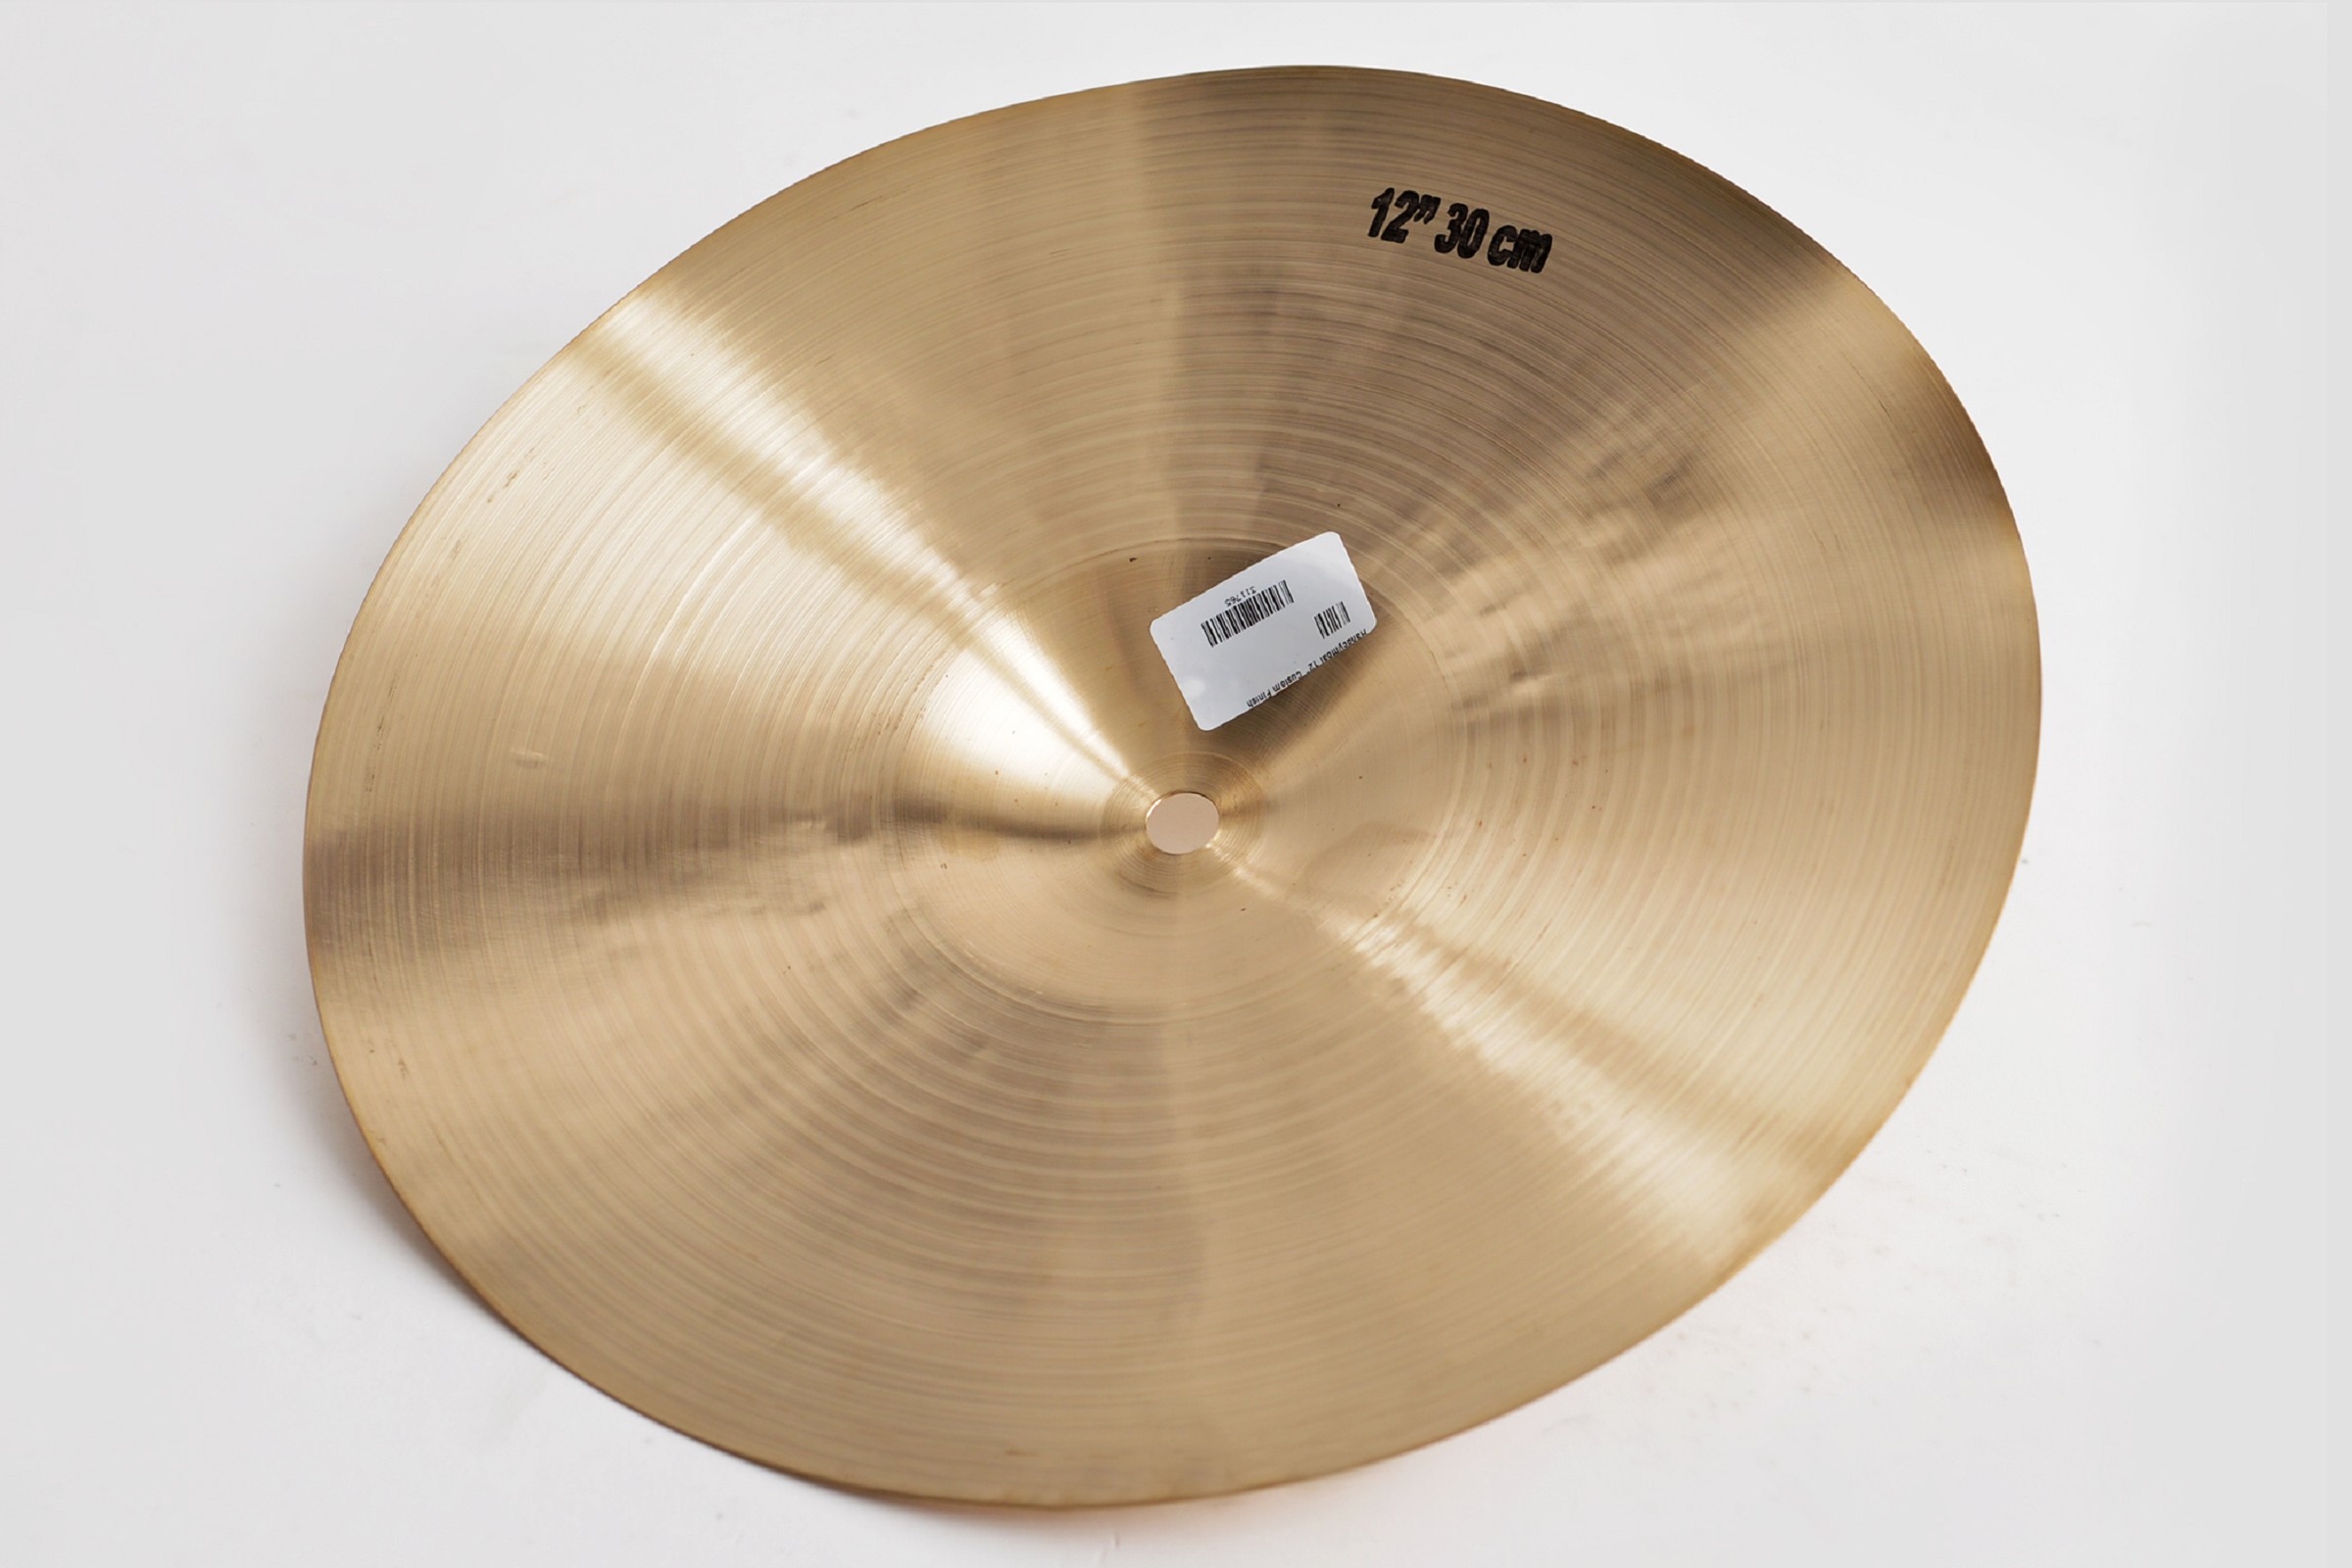 Masterwork Troy Percussion Series 12" Handcymbal